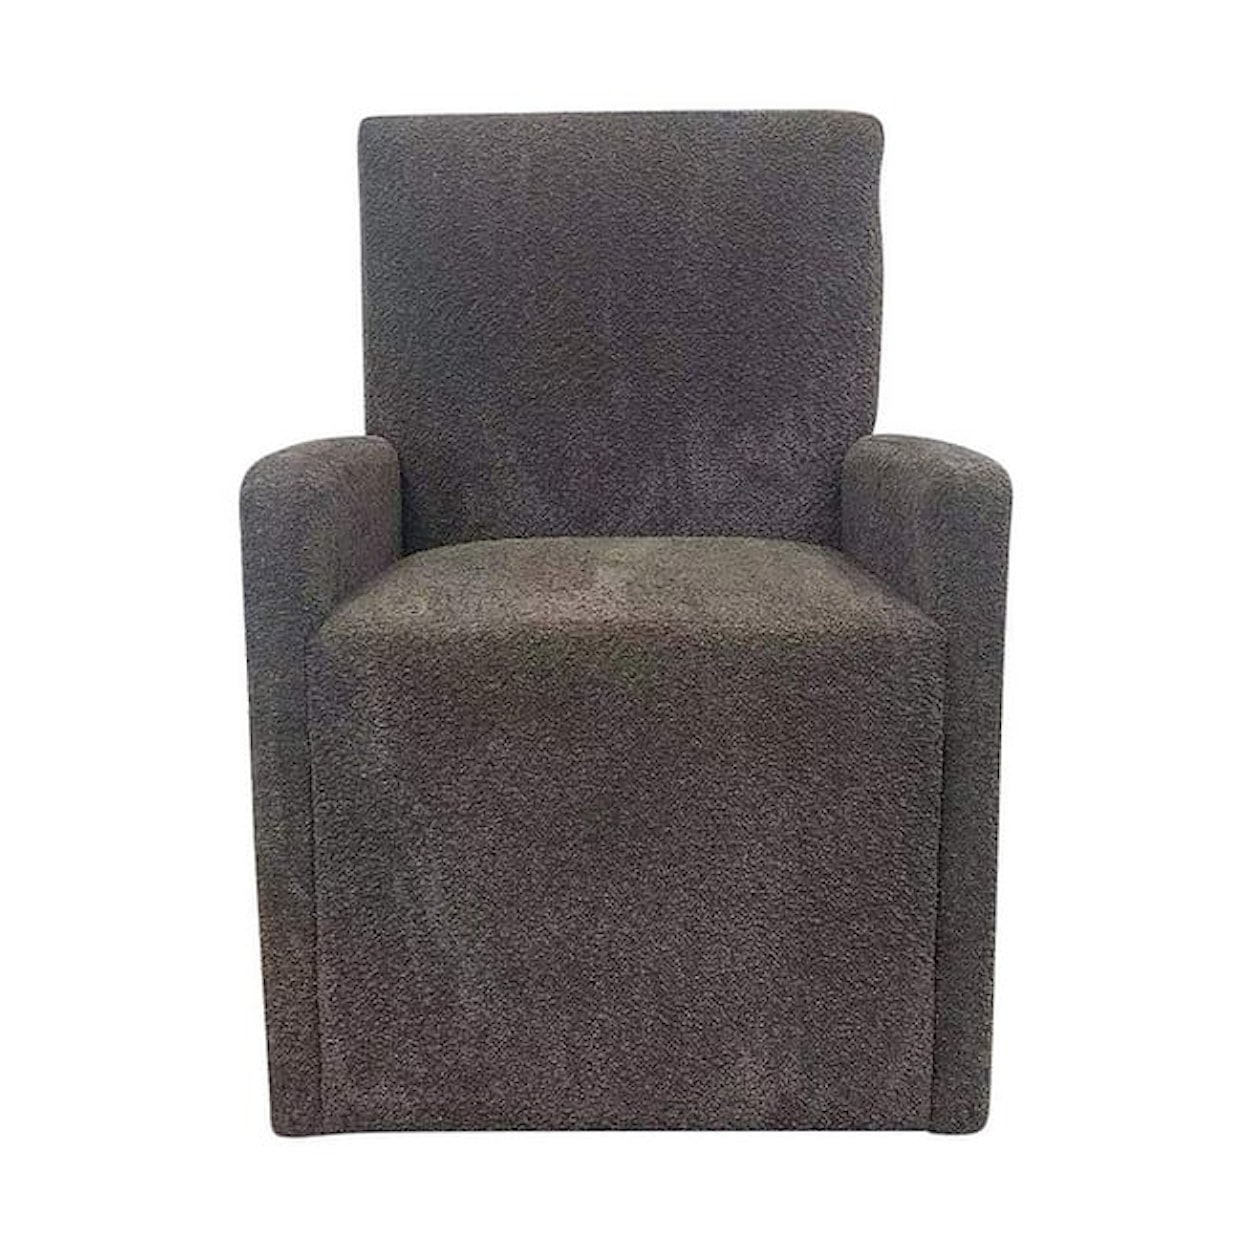 Paramount Furniture Pure Modern Upholstered Caster Chair